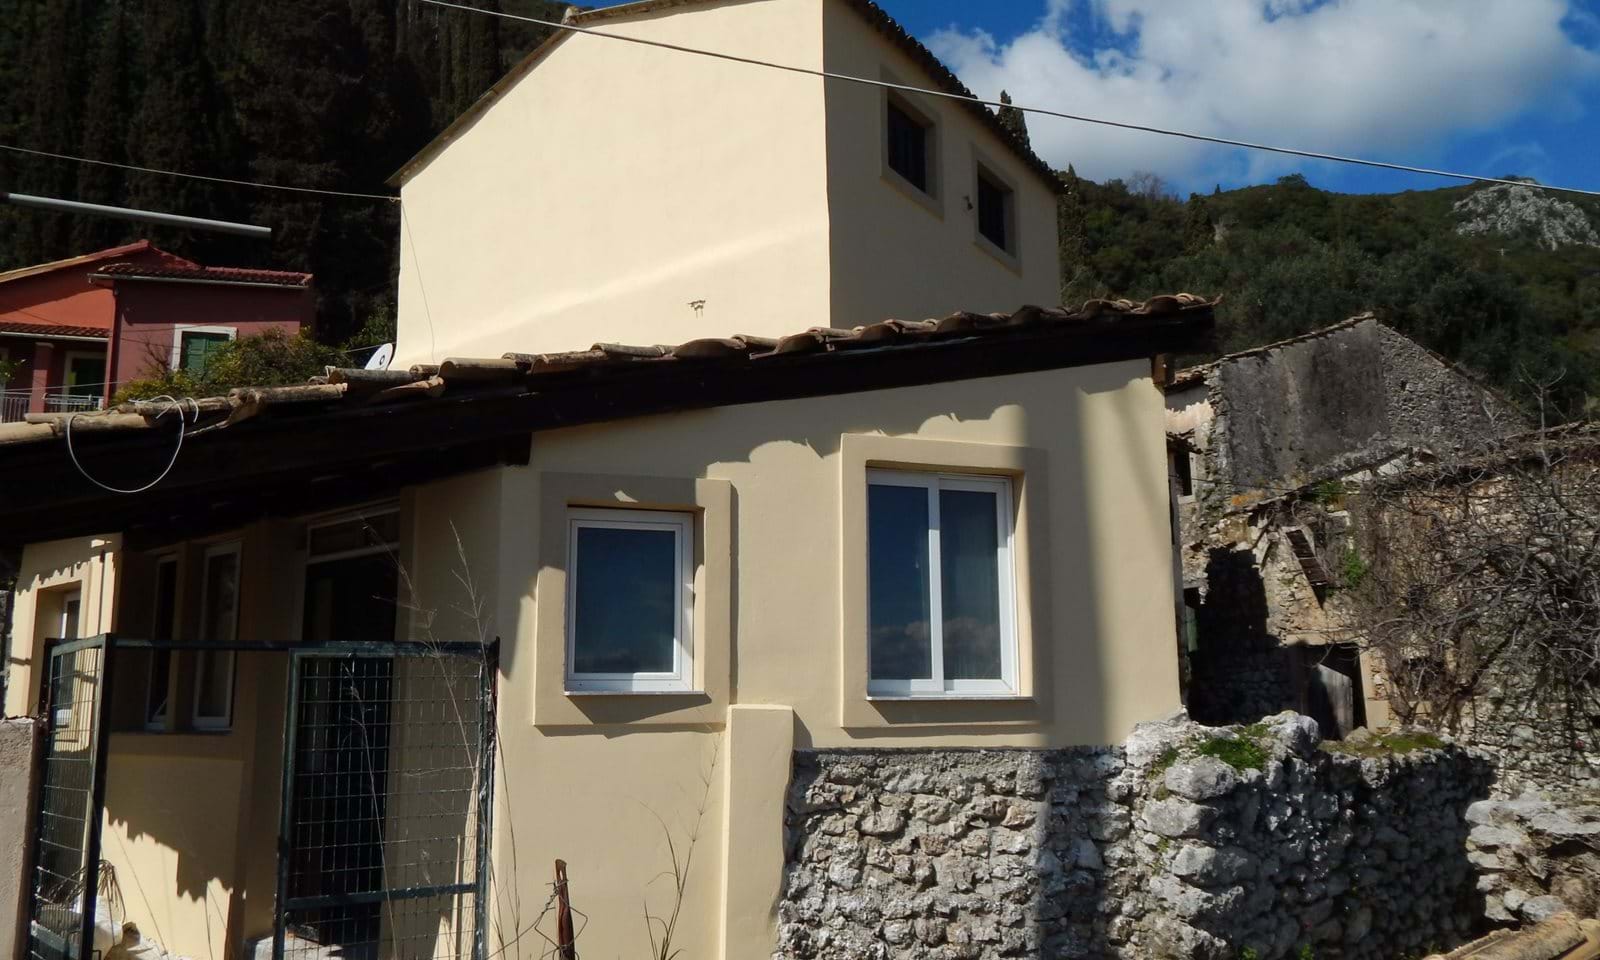 A semi-detached village house with lovely views at the upper part of Ano Korakiana.